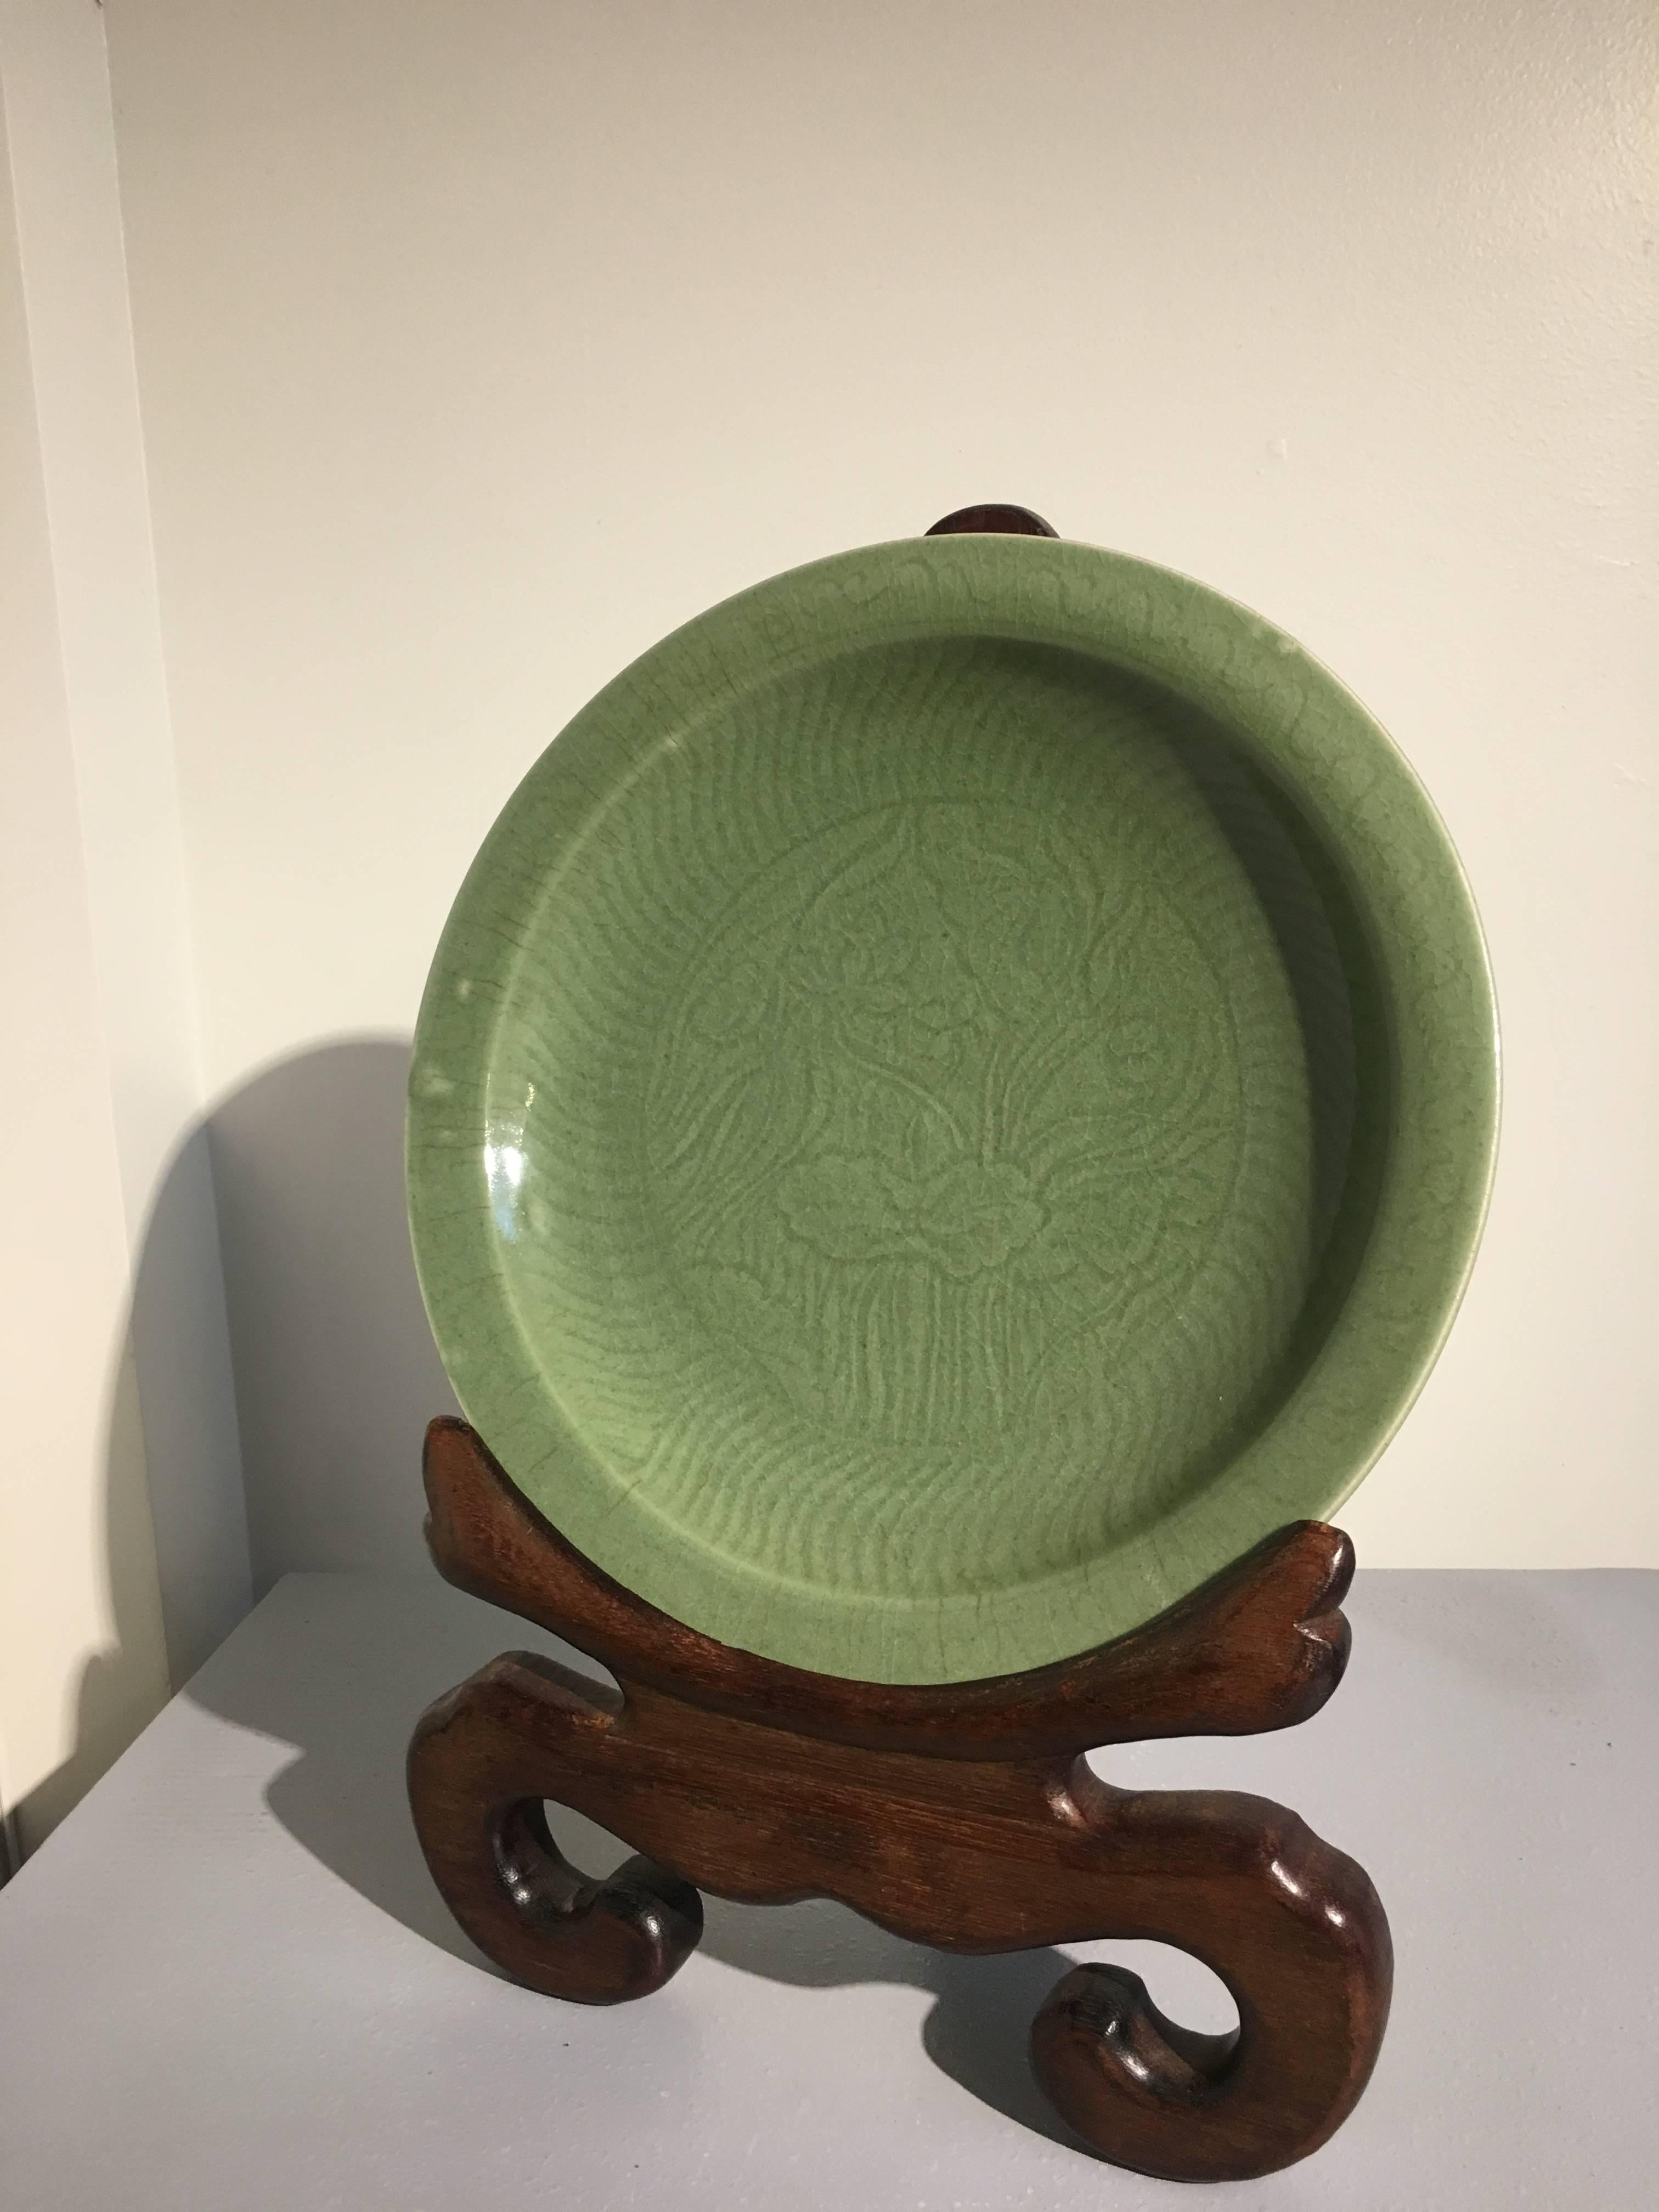 A sublime Chinese celadon glazed shallow dish or charger, Qing Dynasty, mid 18th century, China.
Beautifully glazed, with a carved decoration of a group of lotus, leaves, stalks and blossoms. The interior wall with radiating S-shaped lines, a motif